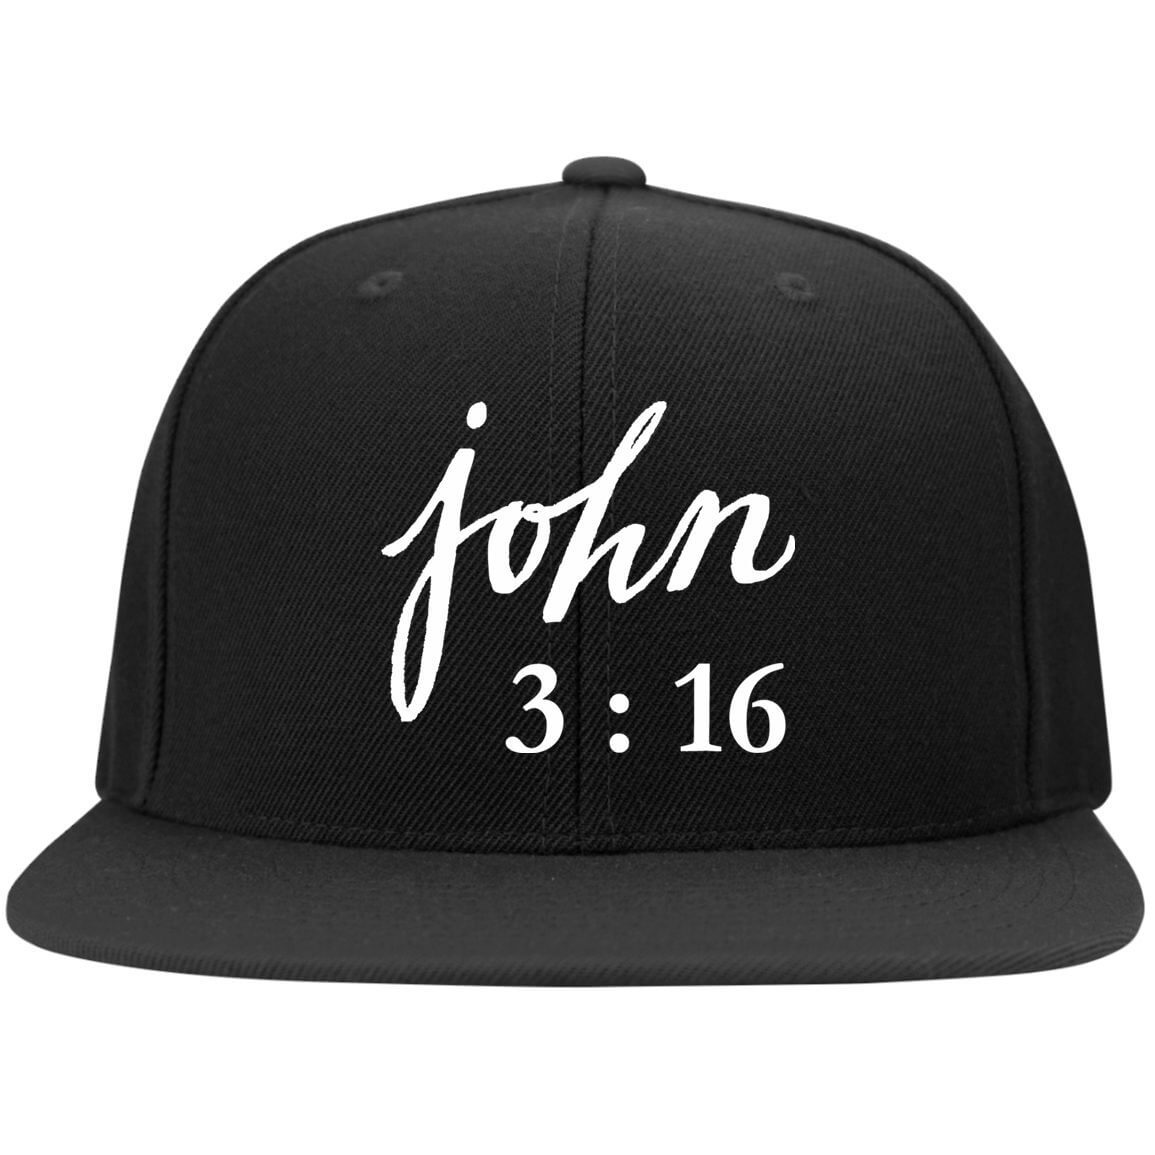 John 3:16 Embroidered Fitted Cap